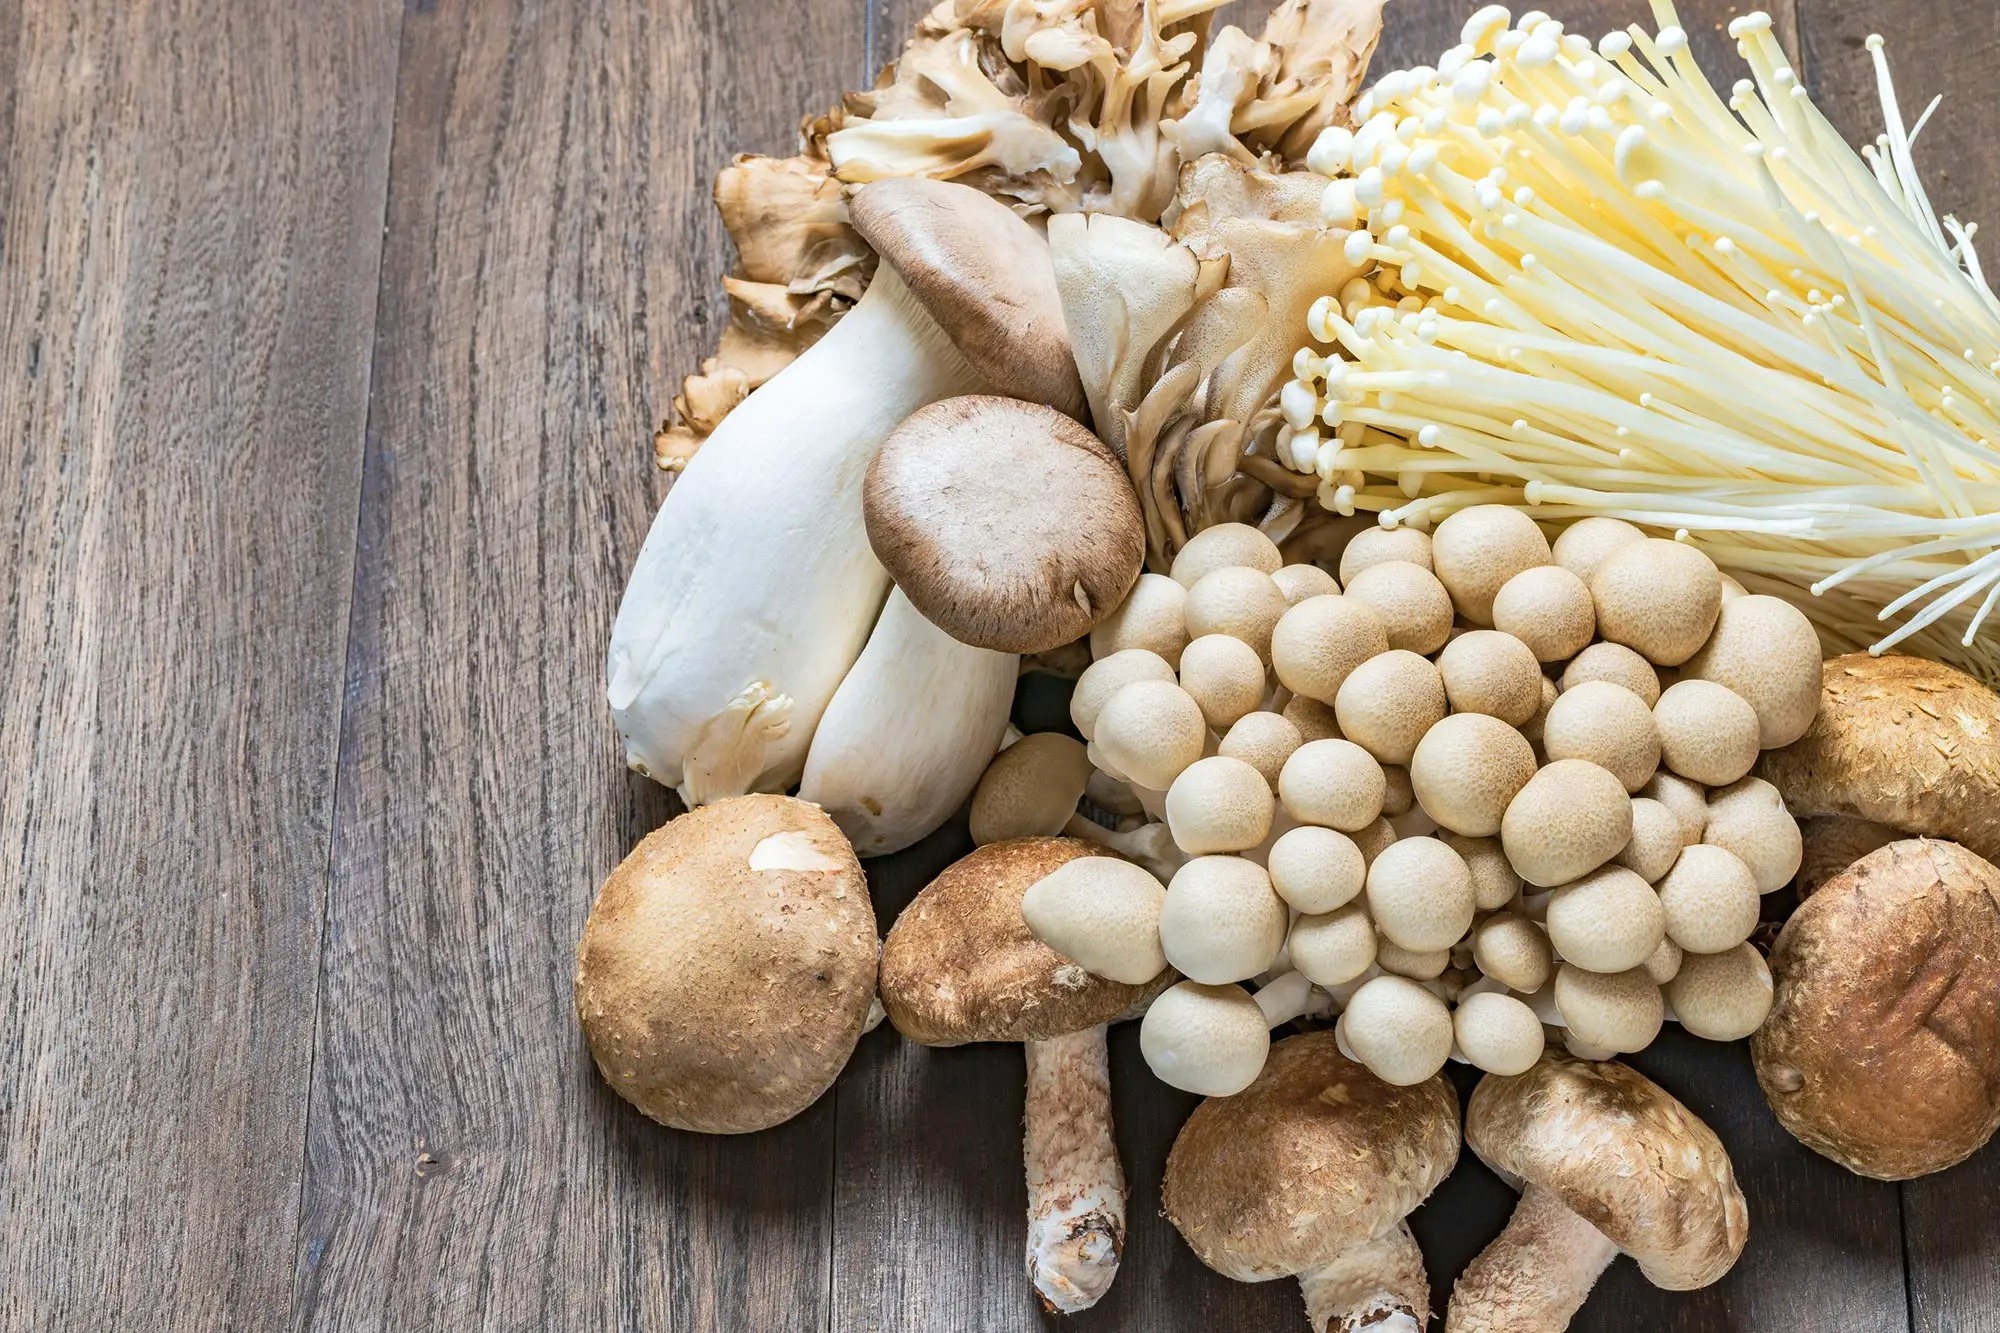 What Health Benefits Do Mushrooms Have